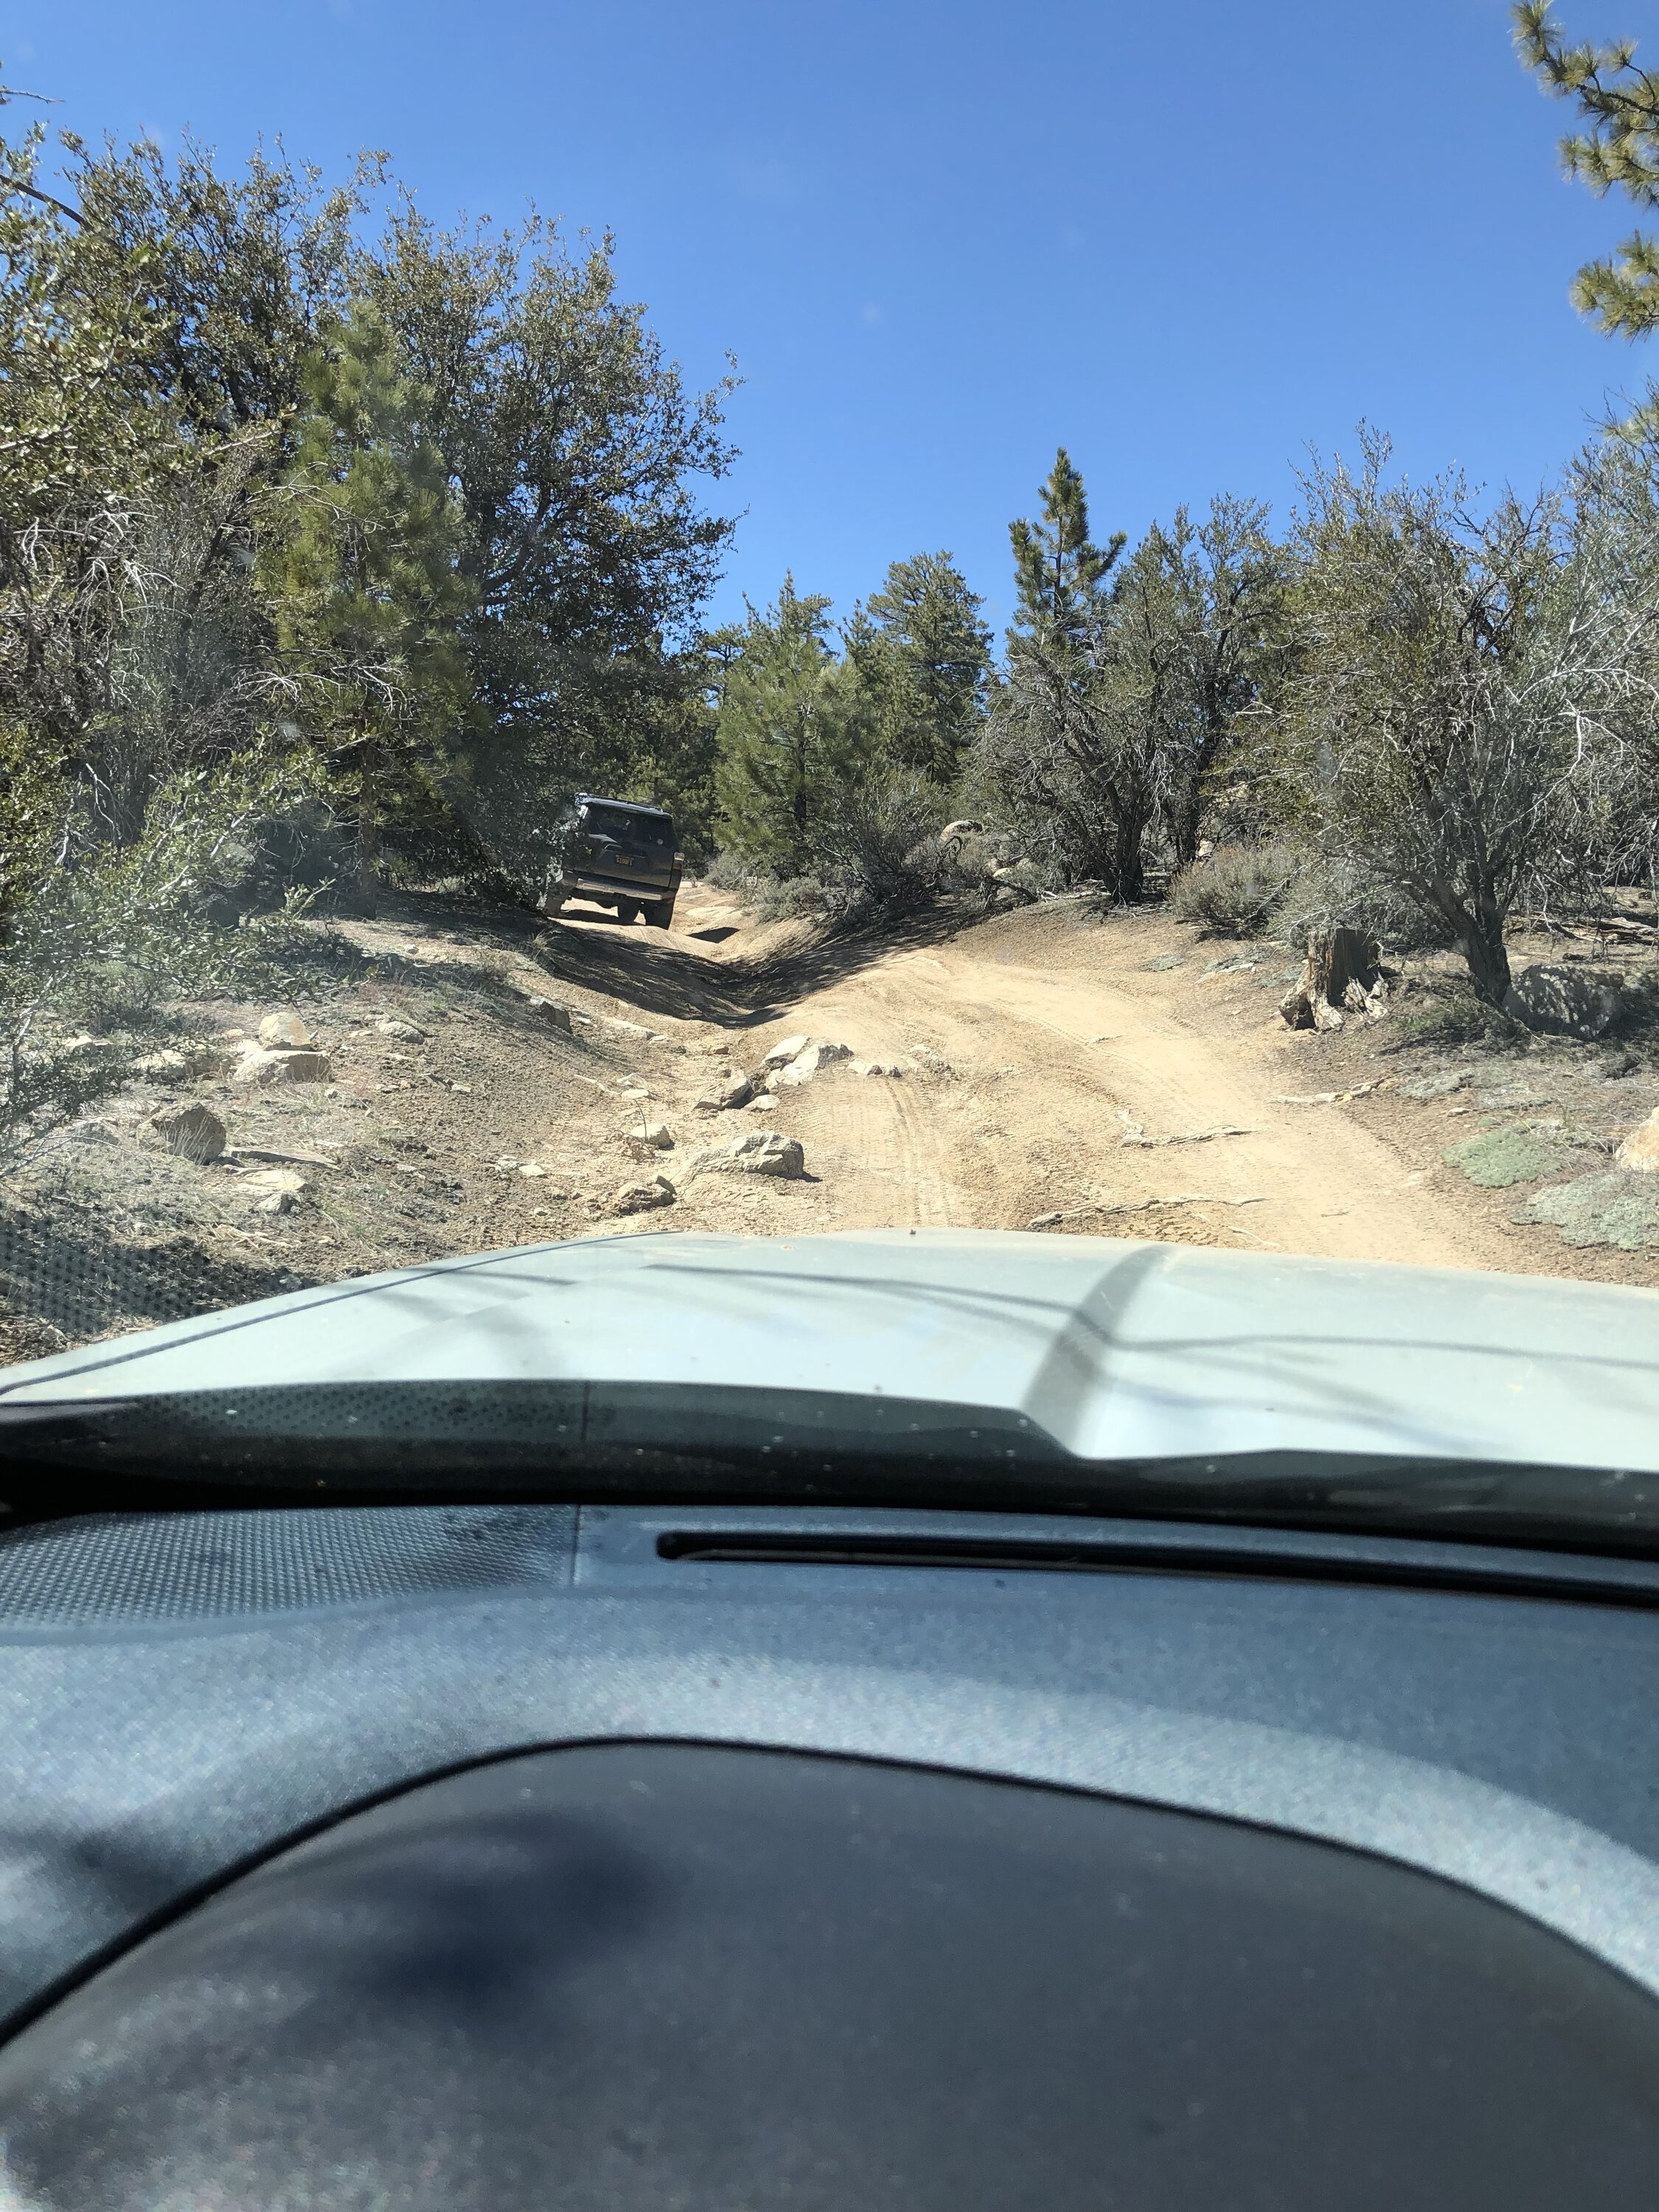 Ford Maverick Stock Tremor is VERY capable... tested off road at Holcomb Valley IMG_9478